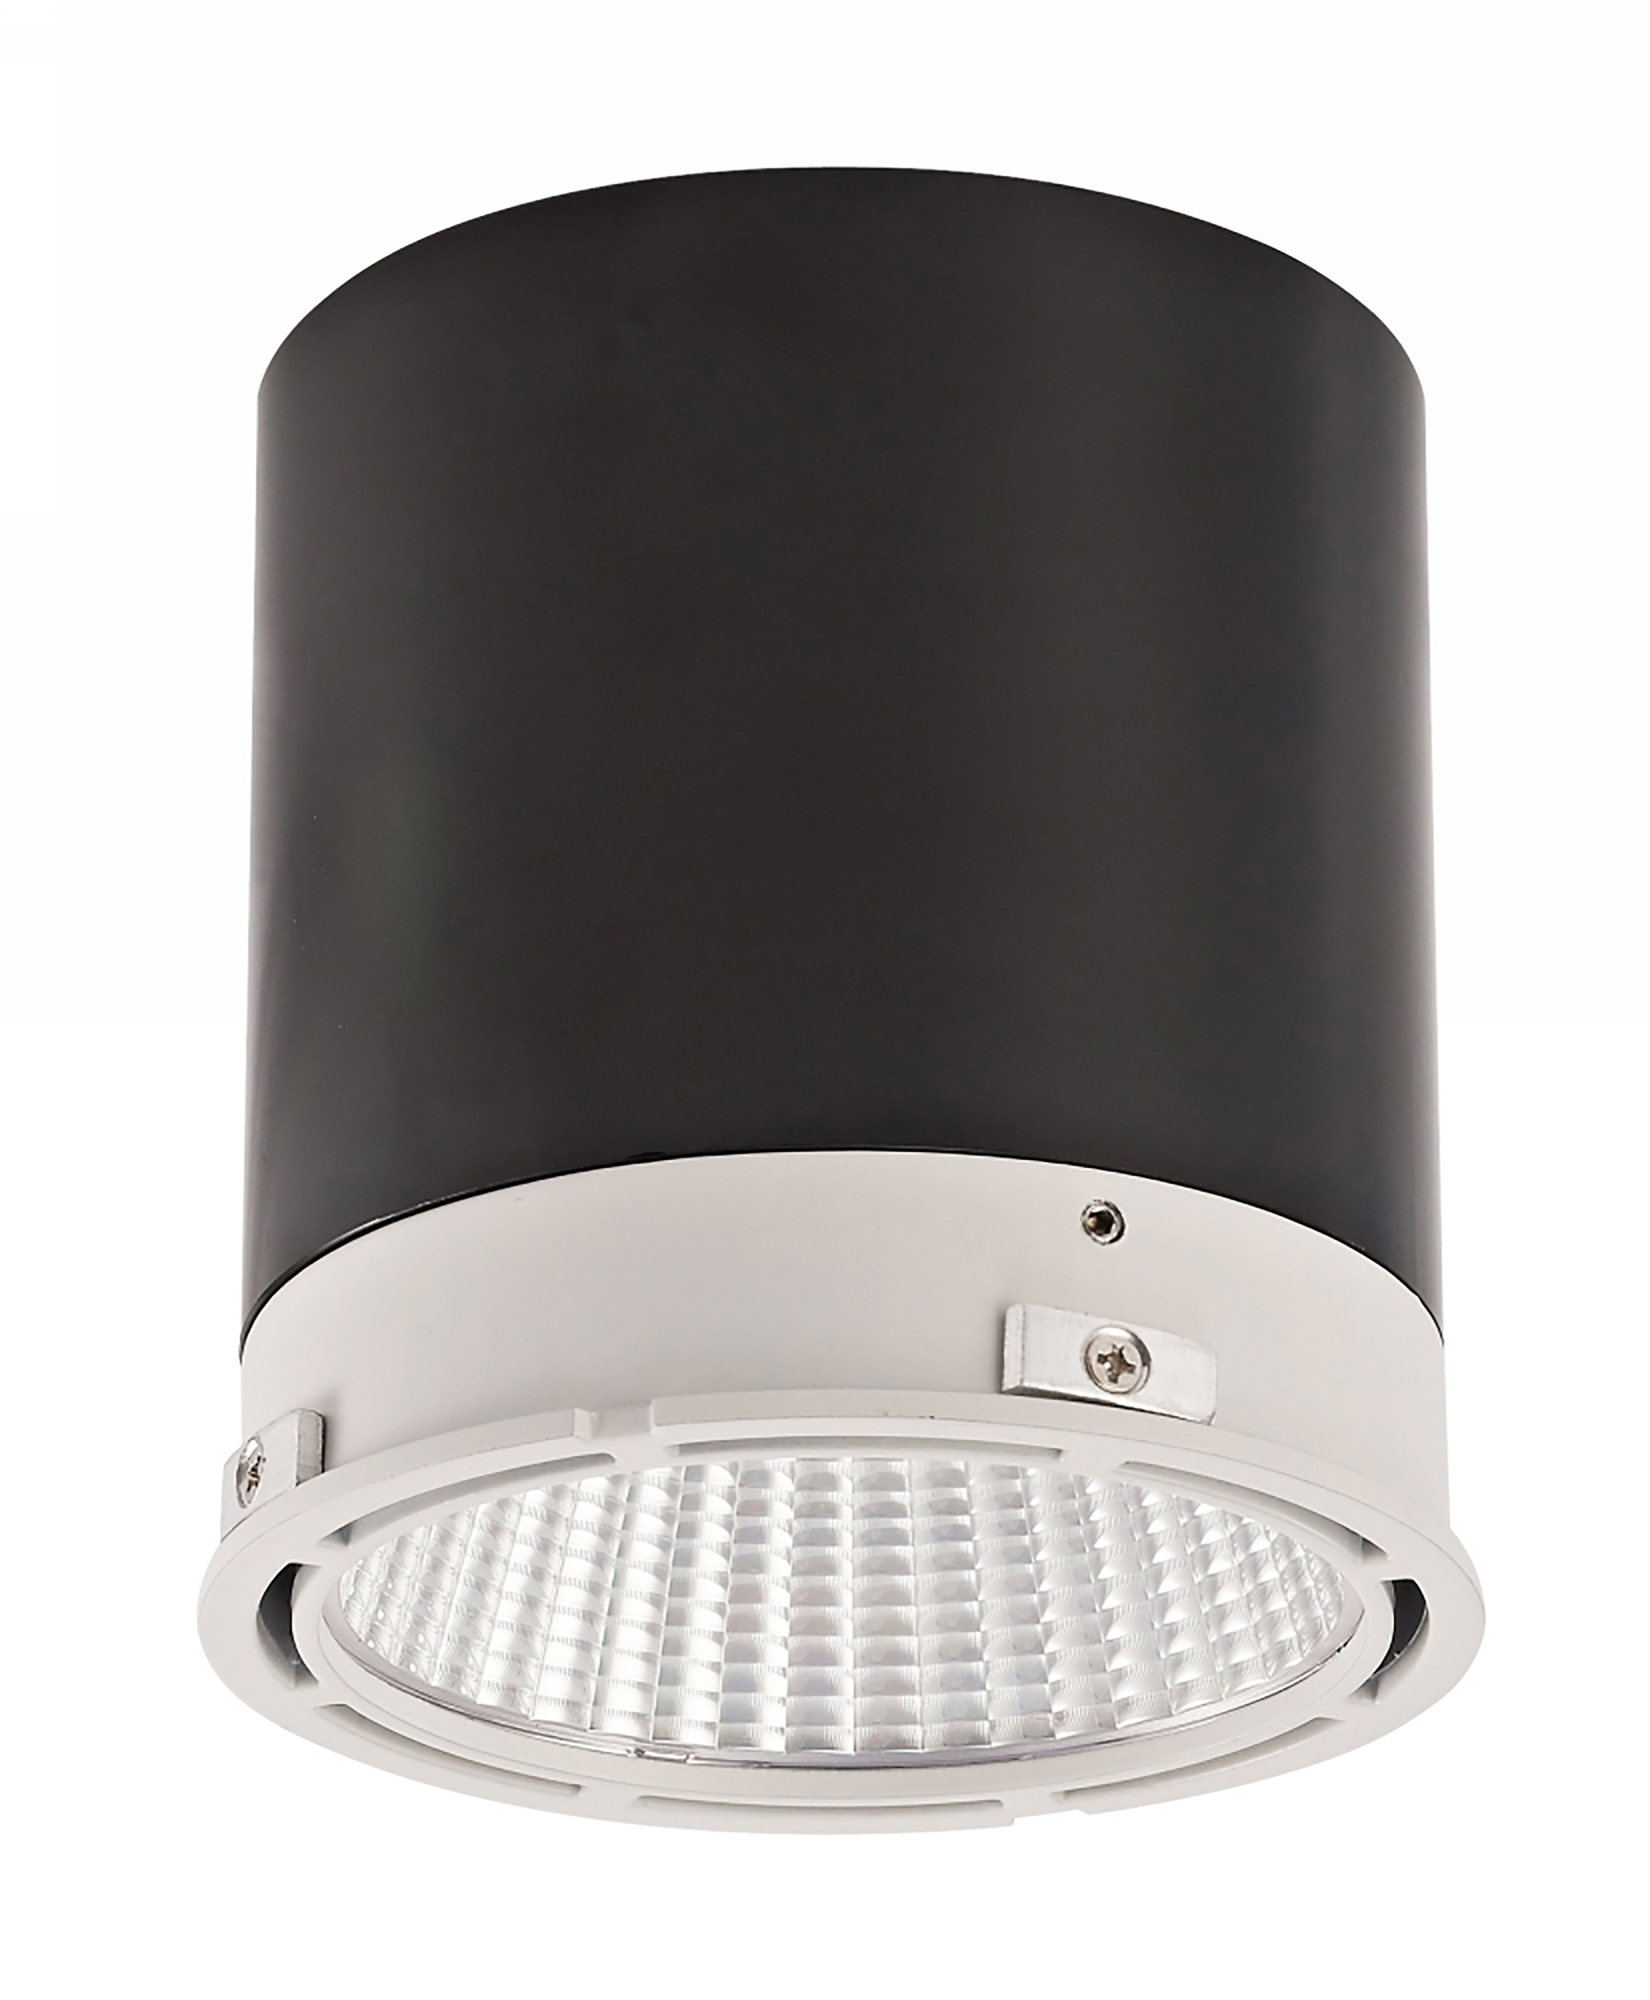 Bardian 40 Recessed Ceiling Luminaires Dlux Round Recess Ceiling